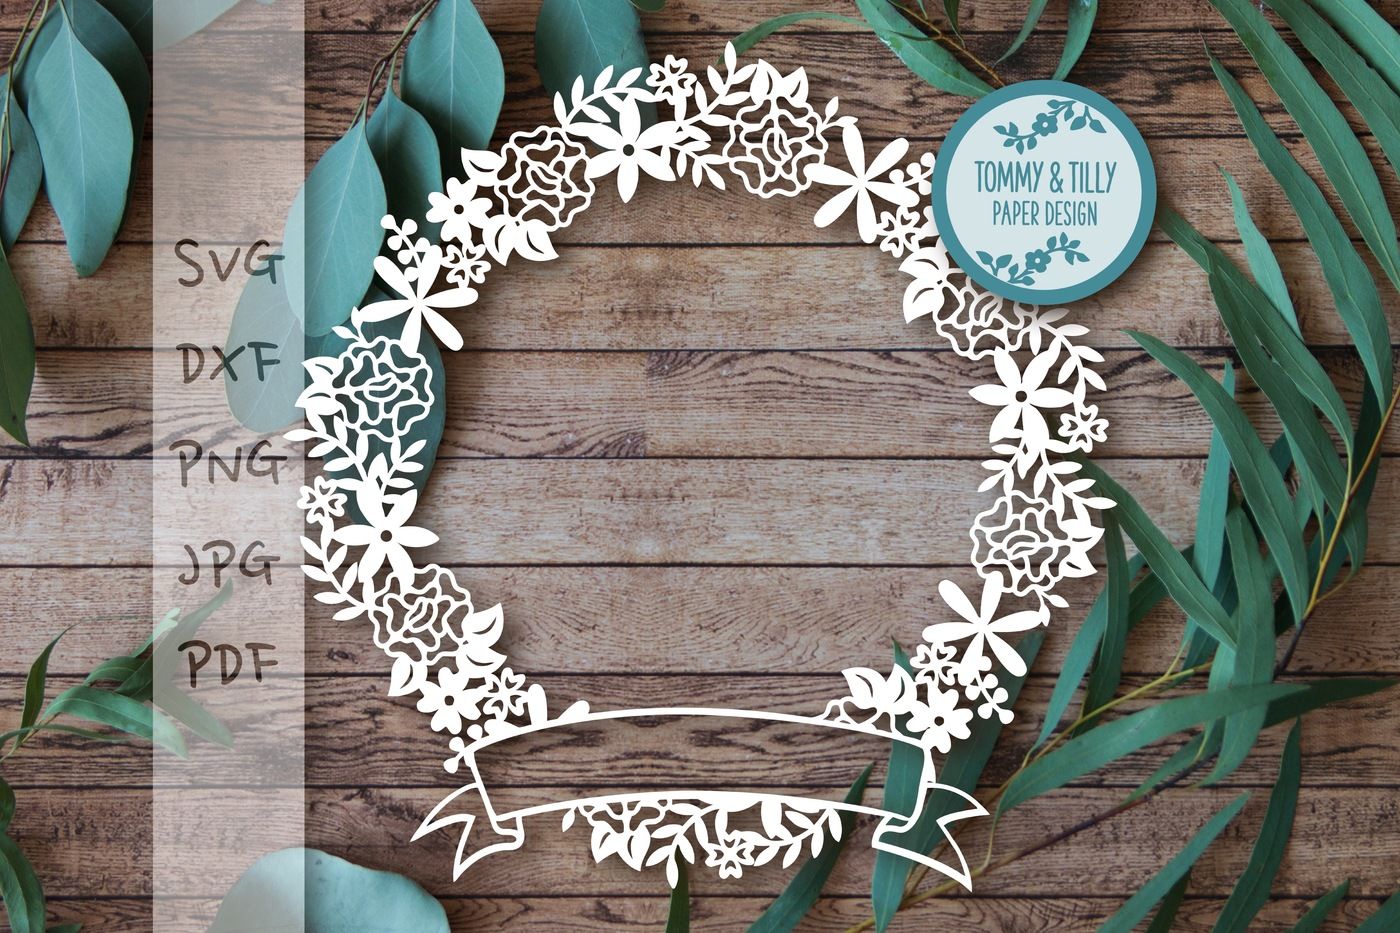 Blank Garland Svg Dxf Png Pdf Jpg By Tommy And Tilly Design Thehungryjpeg Com